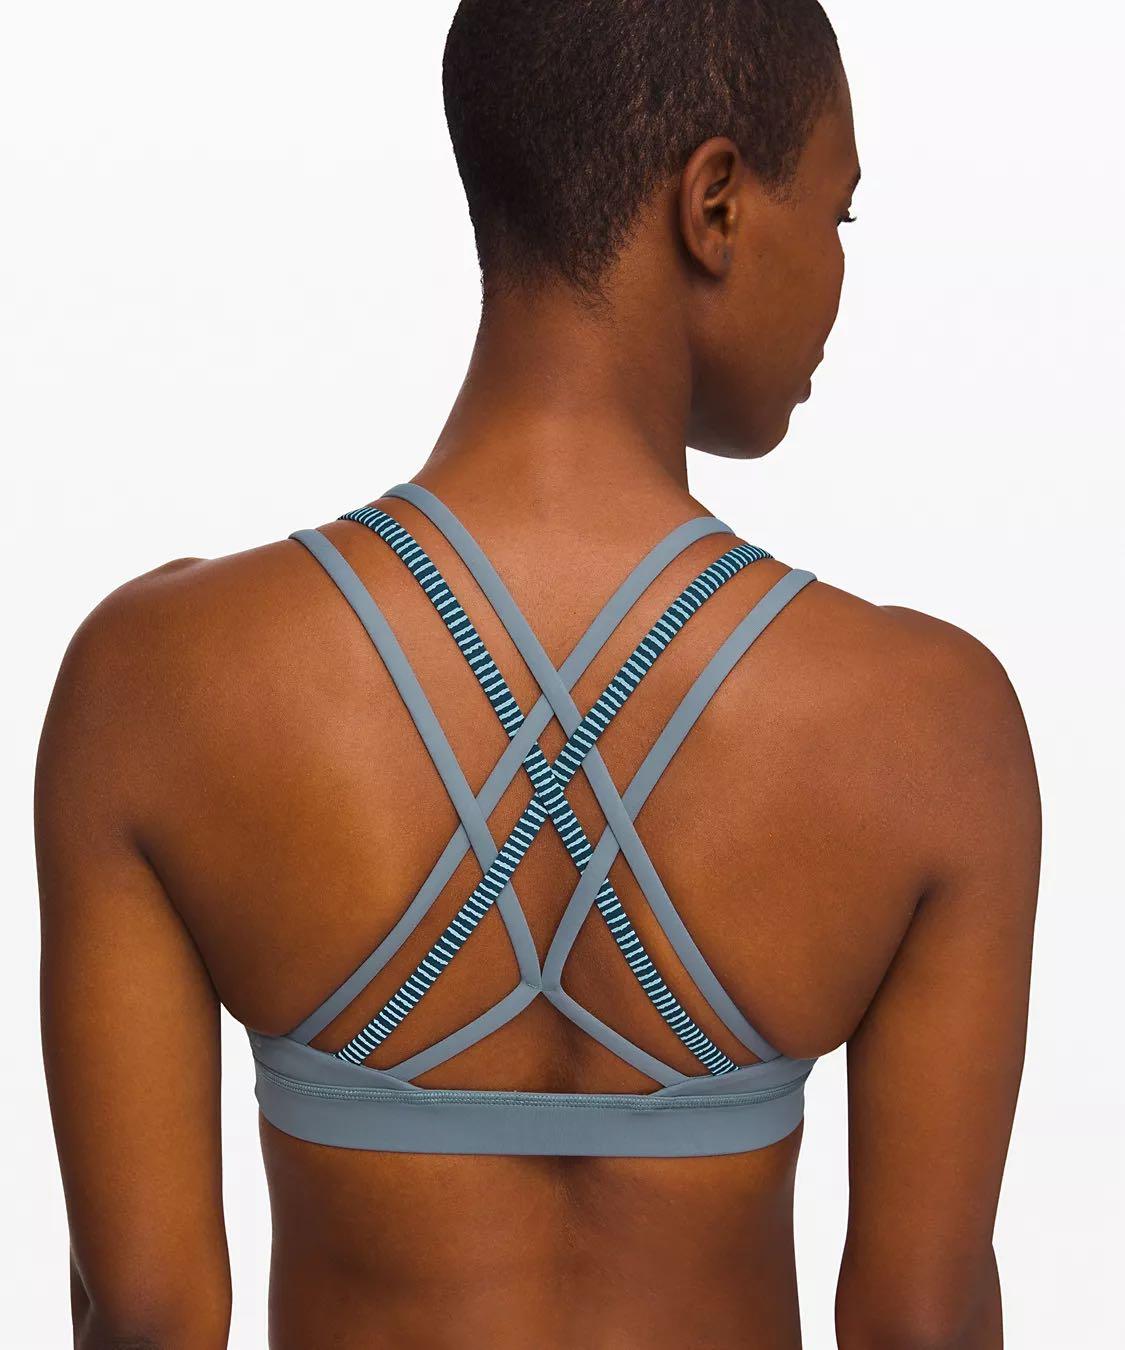 Lululemon BNWT Energy Bra Strappy Special Edition - Blue Charcoal / Night  Diver size 4, Men's Fashion, Activewear on Carousell